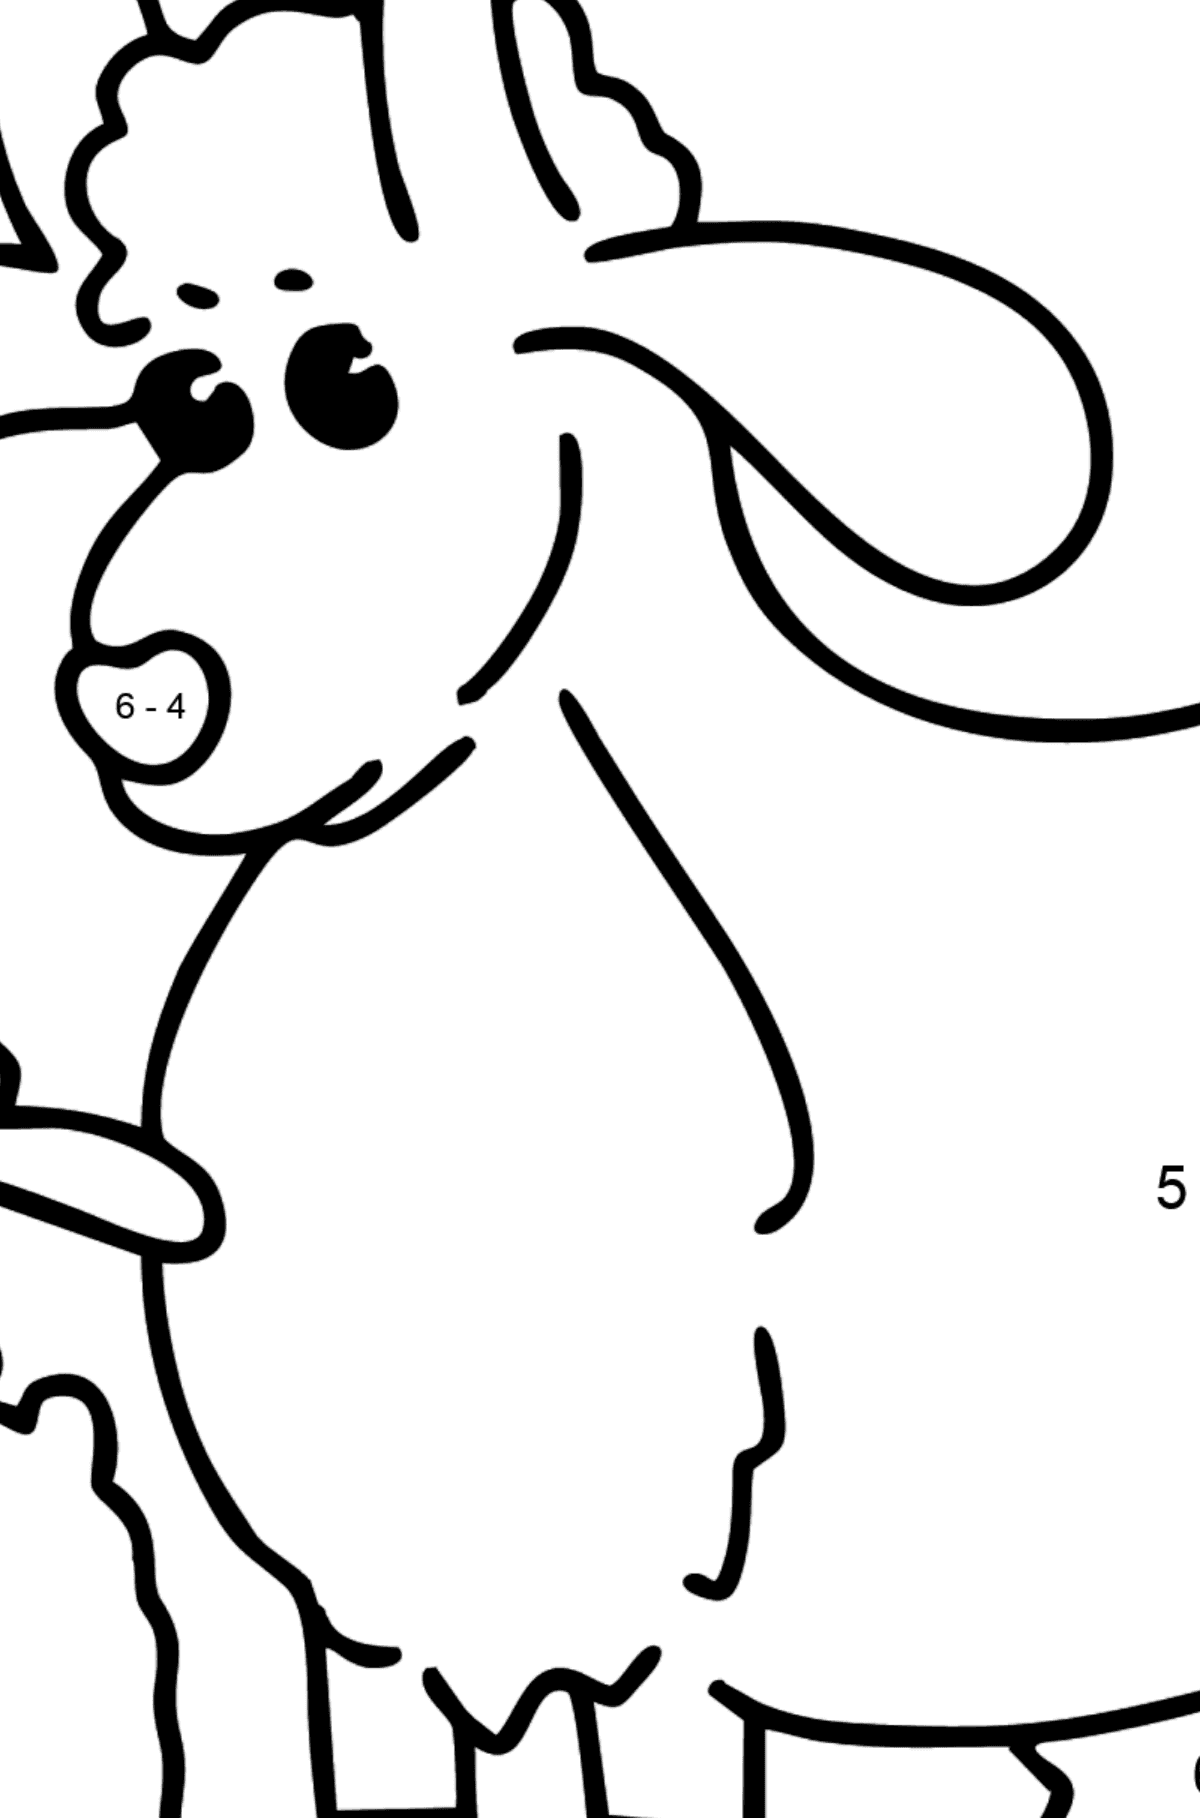 Goat and Kid coloring page - Math Coloring - Subtraction for Kids